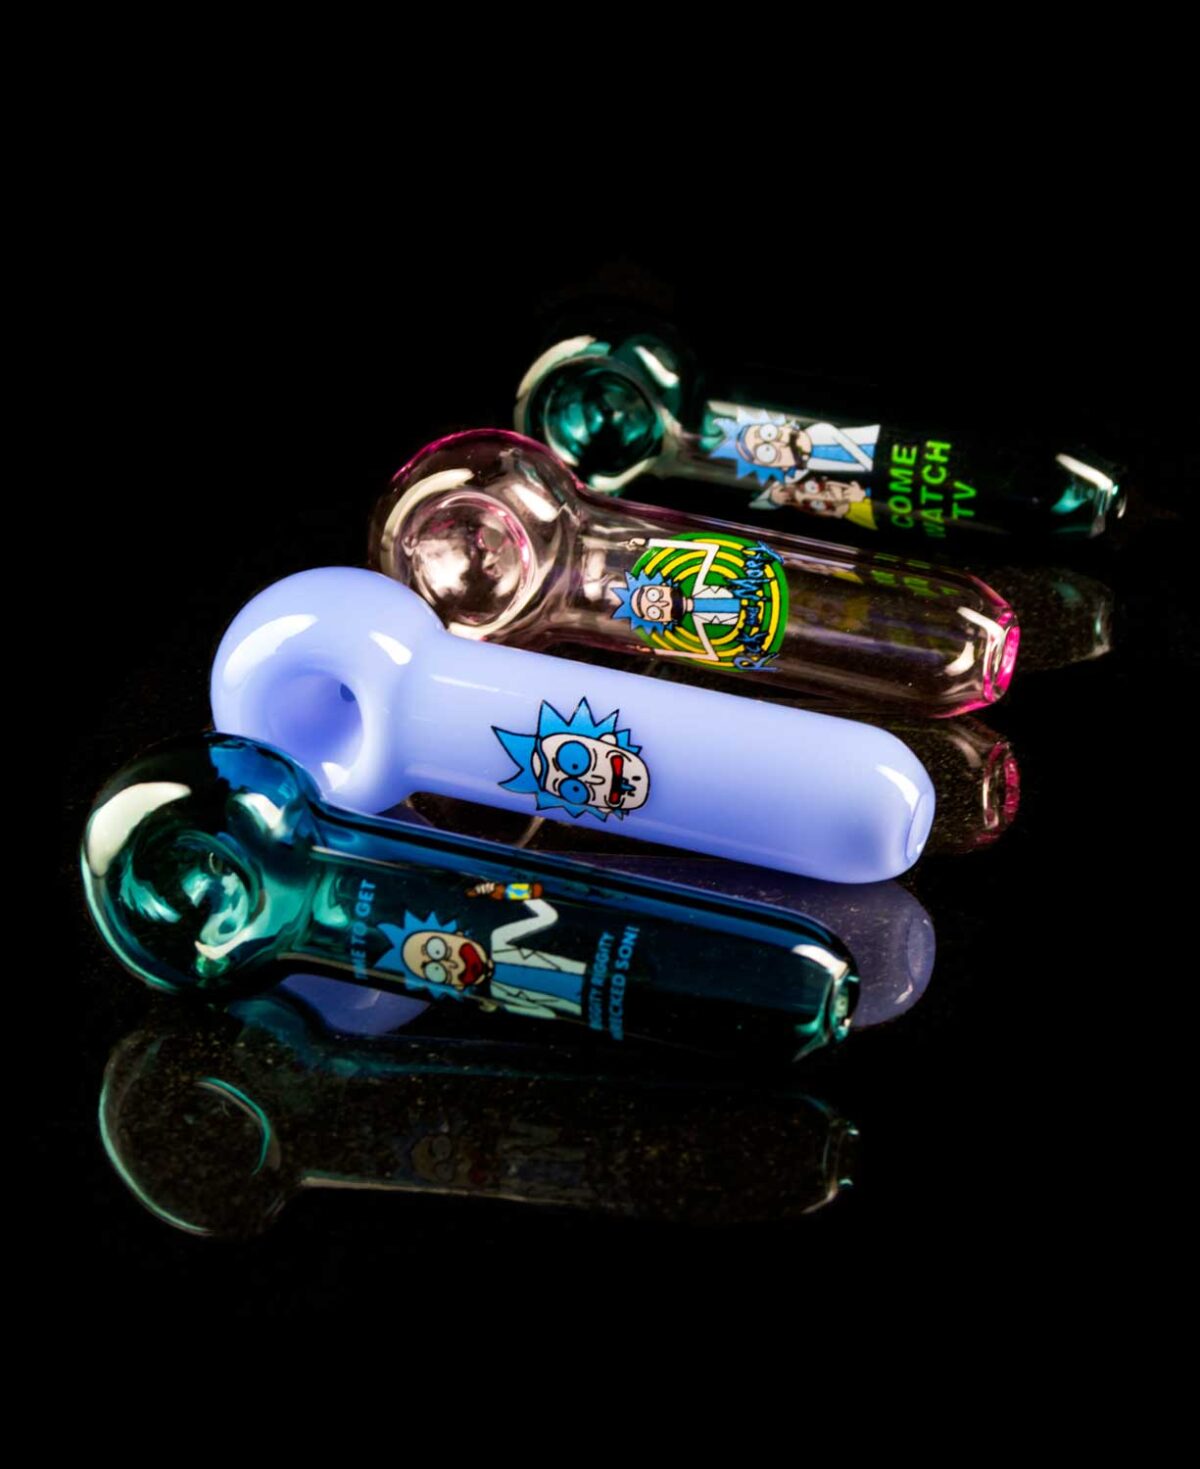 rick and morty pipes made from borosilicate glass